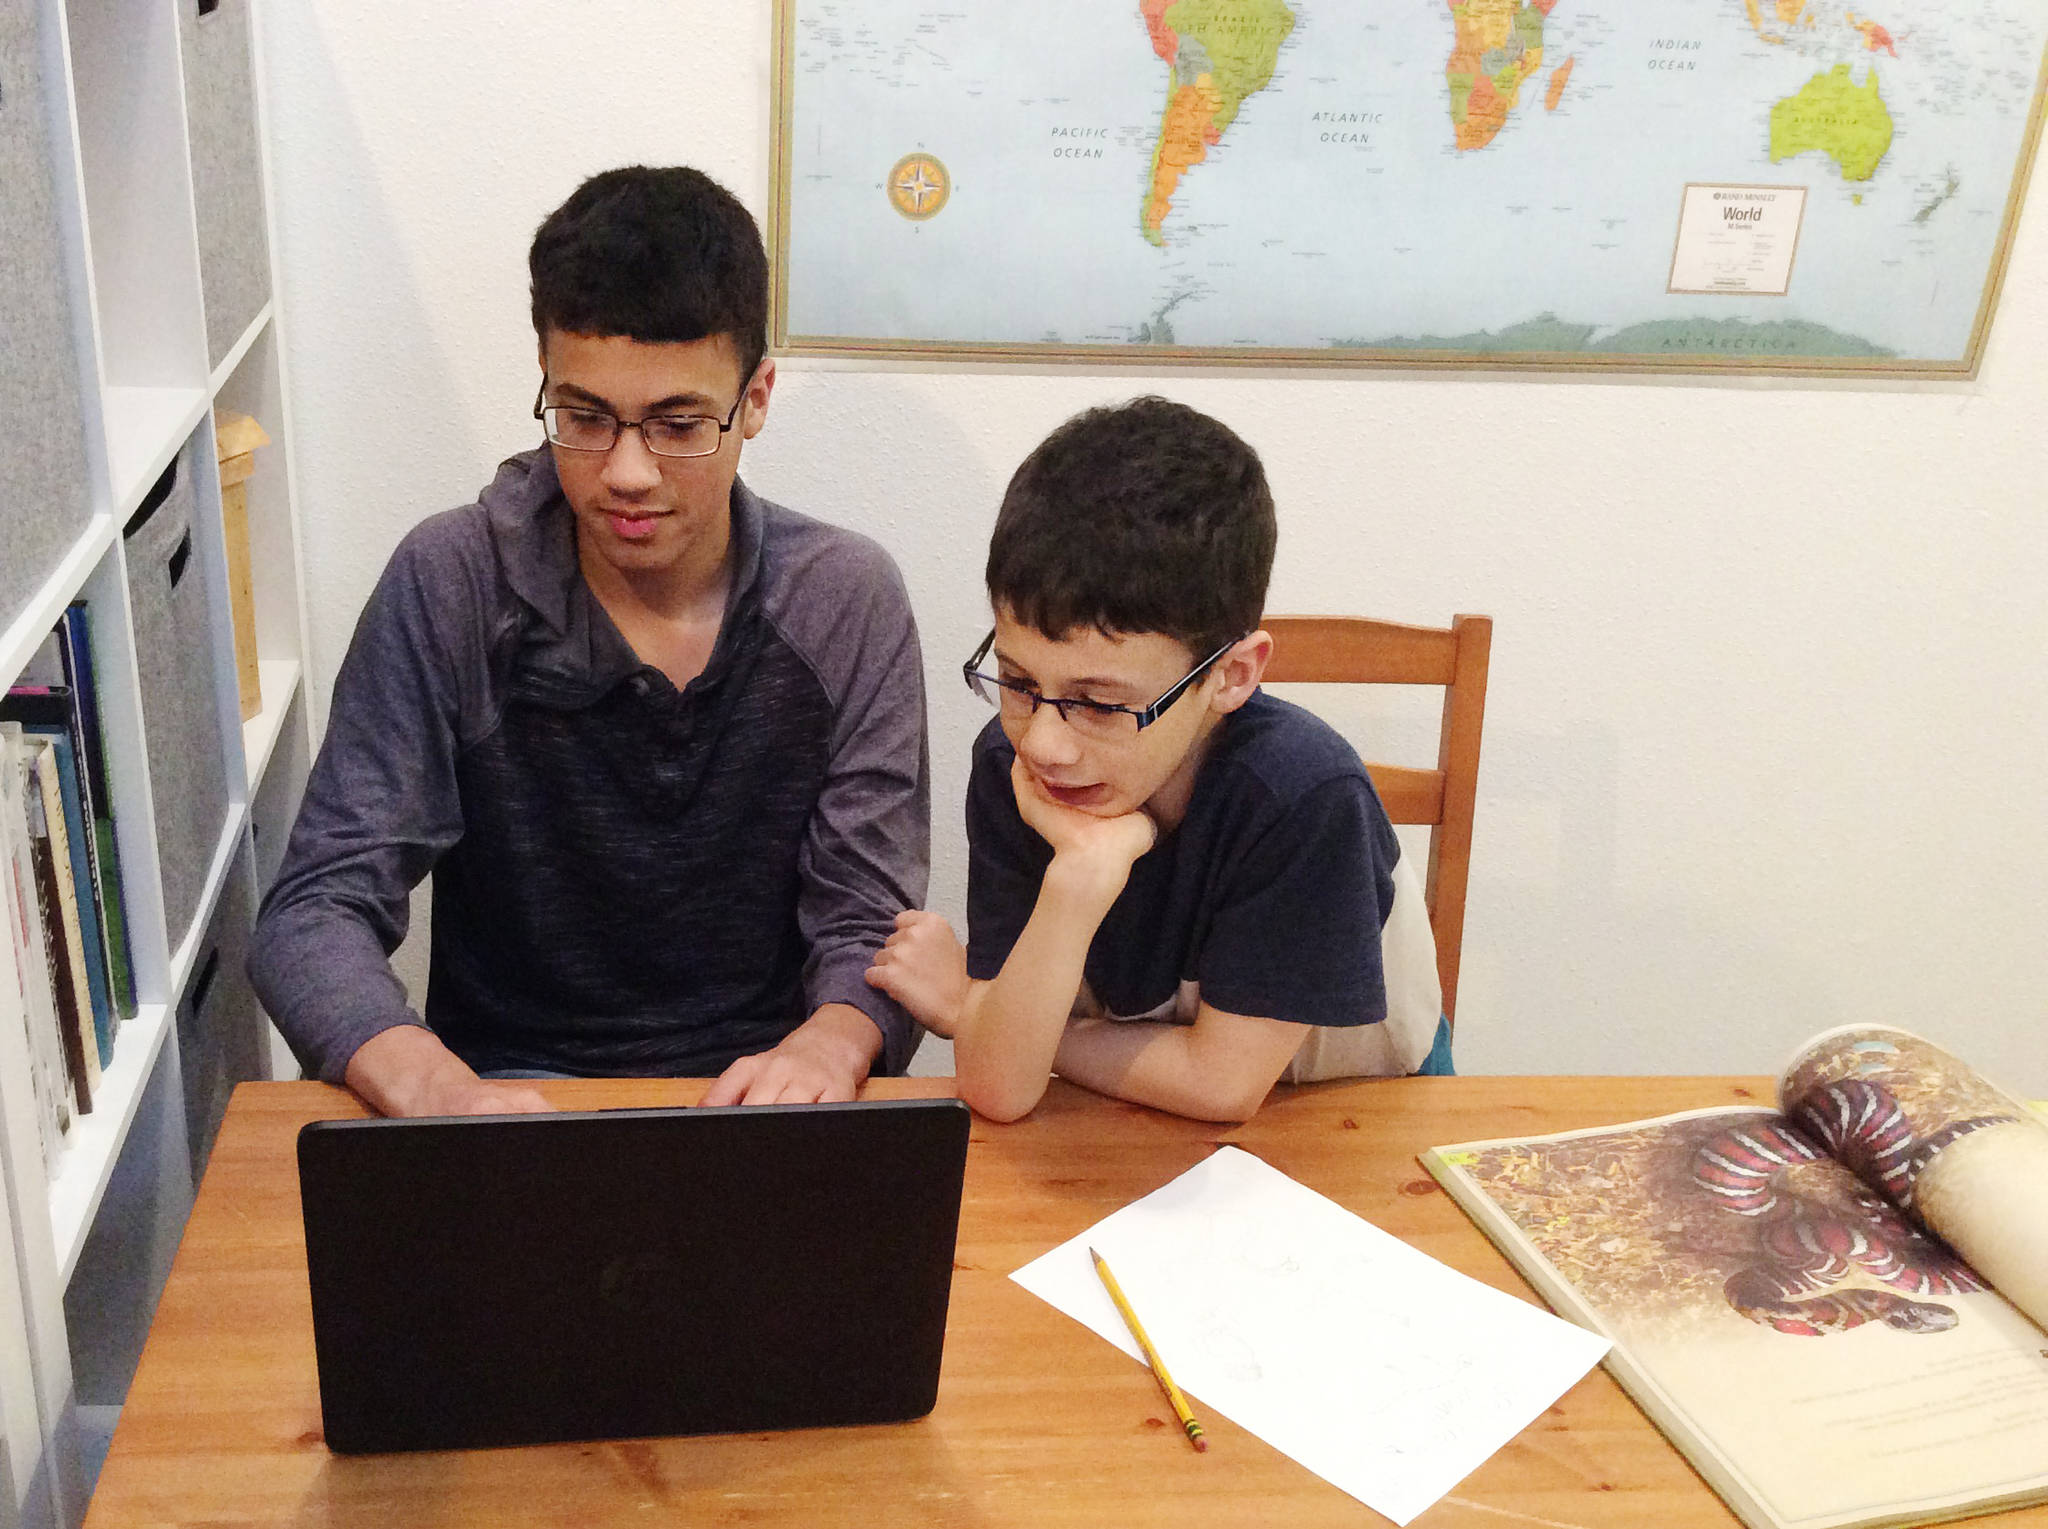 Contributed photo
Twelve-year-old Gabriel and nine-year-old Ian Malone explore the world from home.